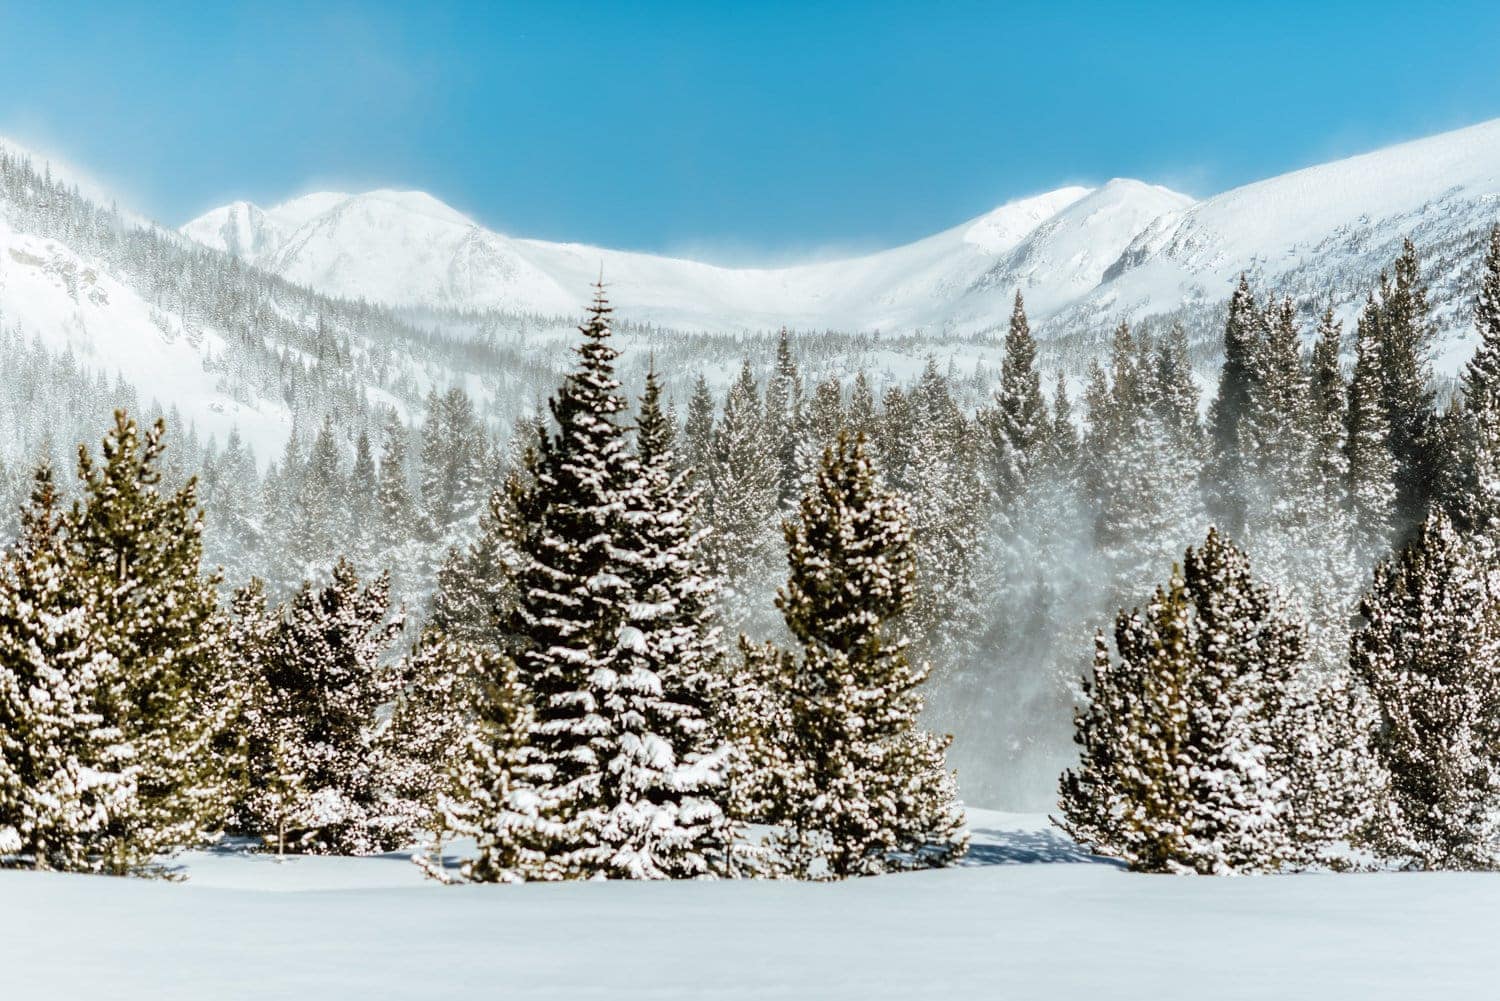 Landscape of forest with snow-covered trees. There is snow covering the ground and the mountains in the background at Indian Peaks, in Colorado. 